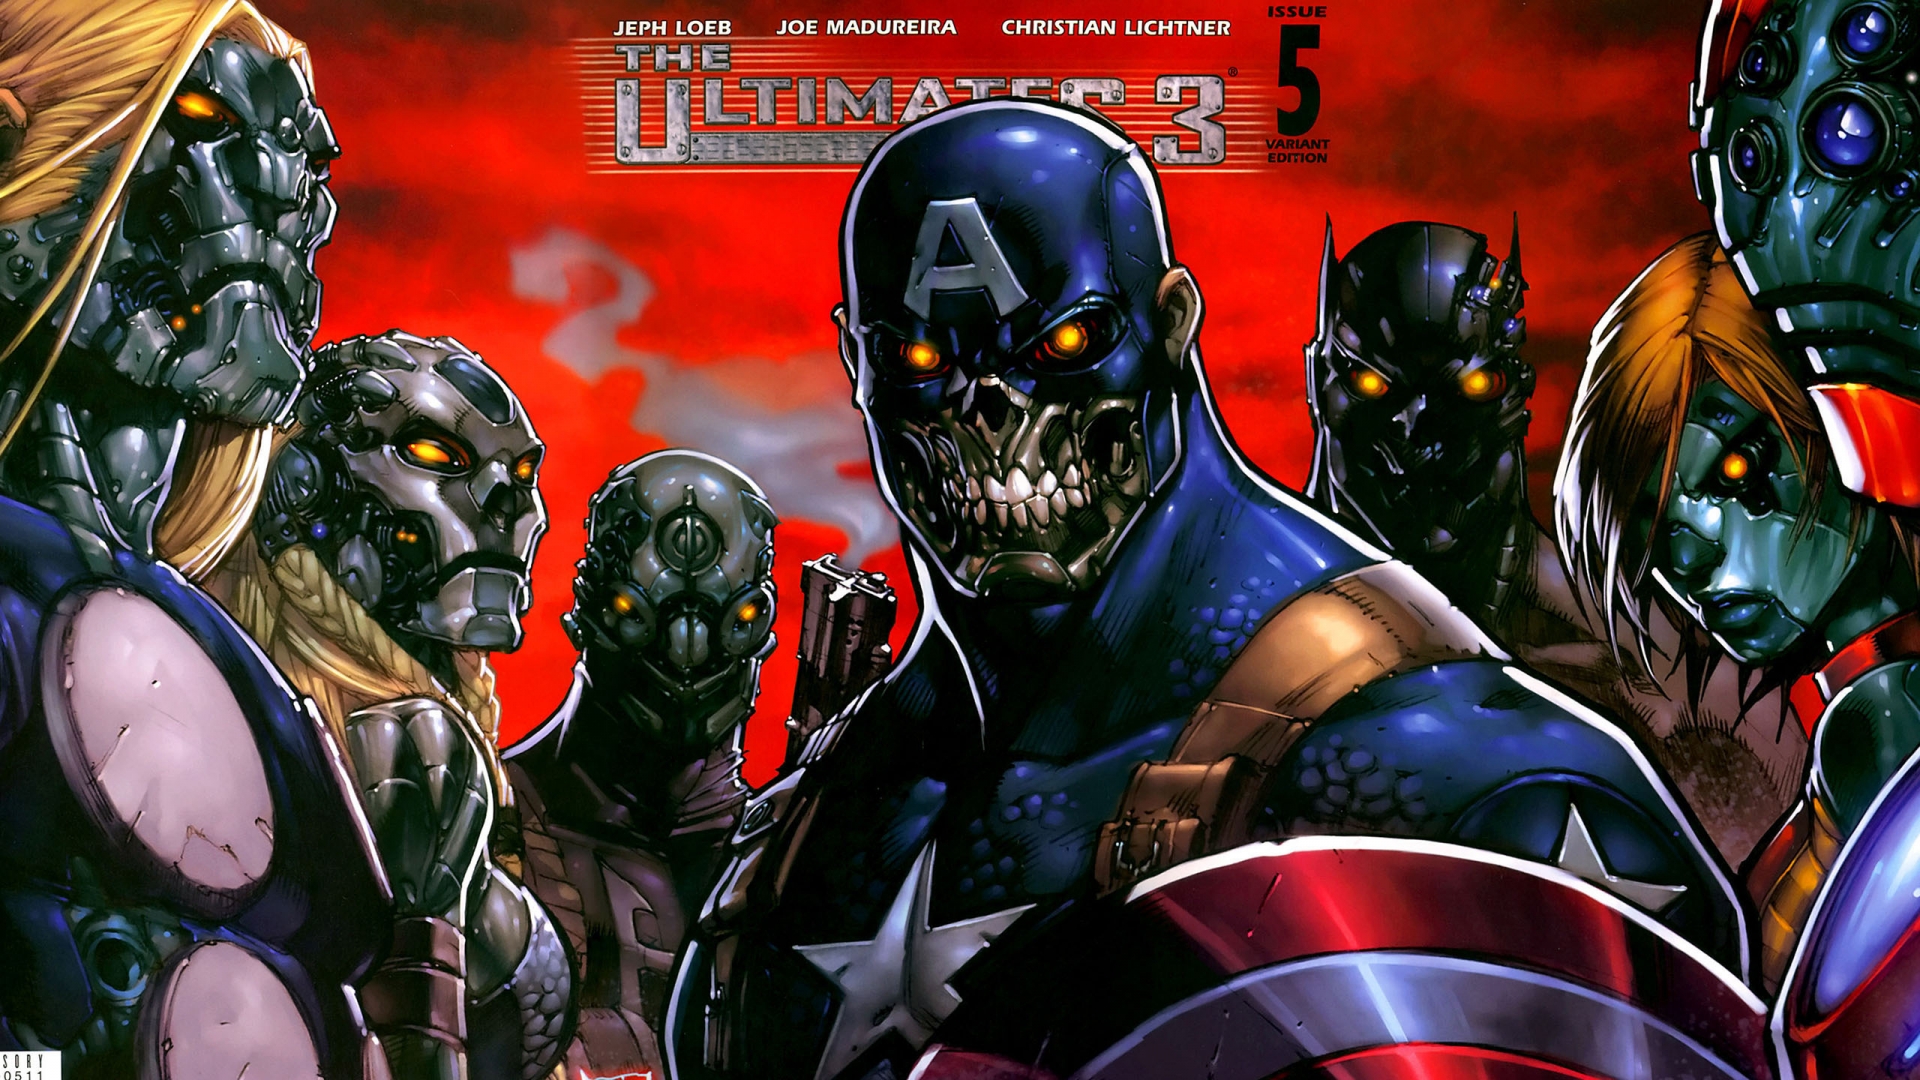 The Ultimates 3 for 1920 x 1080 HDTV 1080p resolution